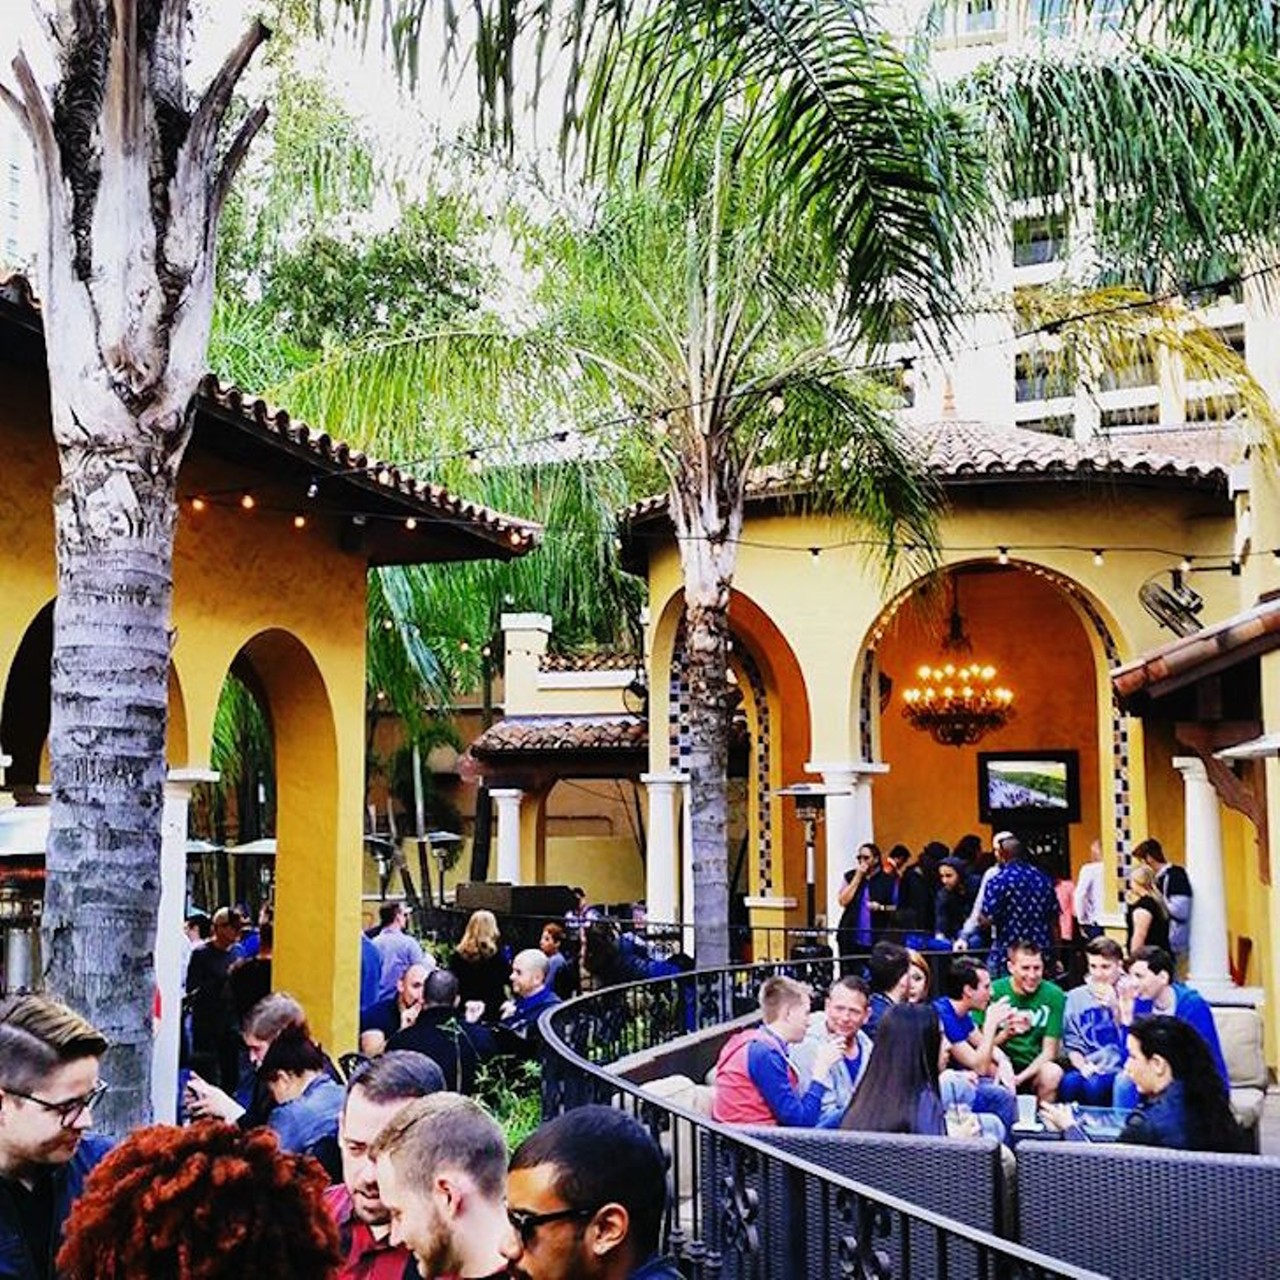 Ember
42 W. Central Blvd., 407-849-5200
13 TVs and 1 projector
Ember&#146;s brunch deal may just tickle your fancy. All-you-can-drink mimosas and sangria is offered every Sunday from 11 a.m. to 3 p.m. Cheers to the Super Bowl!
Photo via floridavacationhomes/Instagram